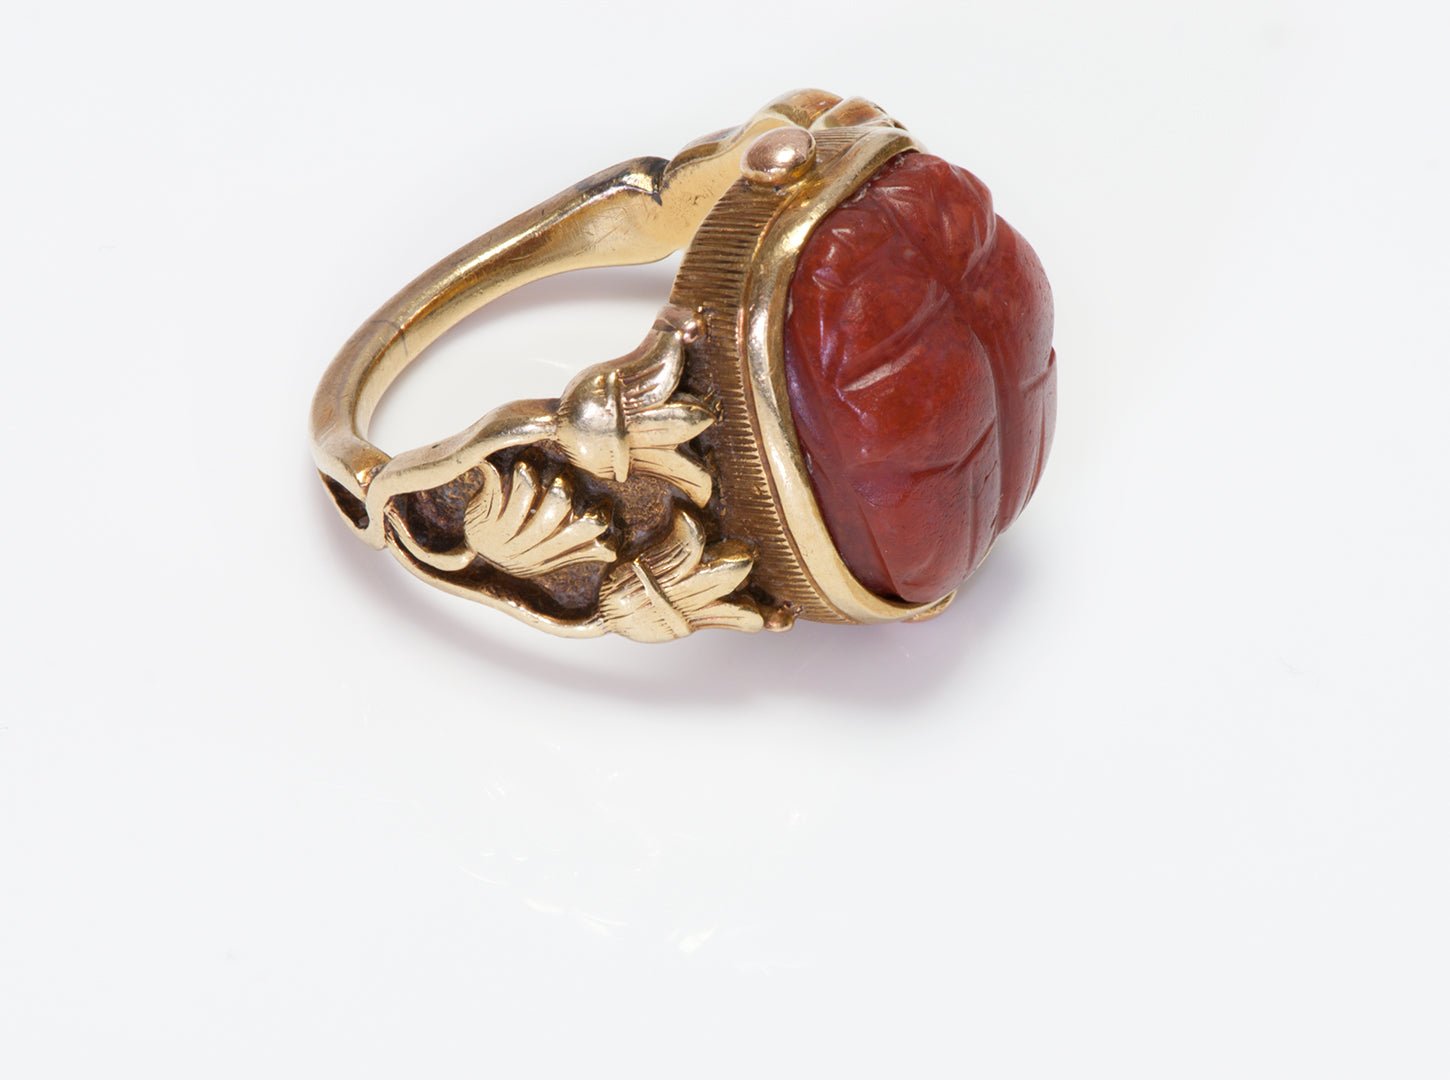 Antique Tiffany & Co. 18K Gold Carved Stone Scarab Ring by Gustav Manz